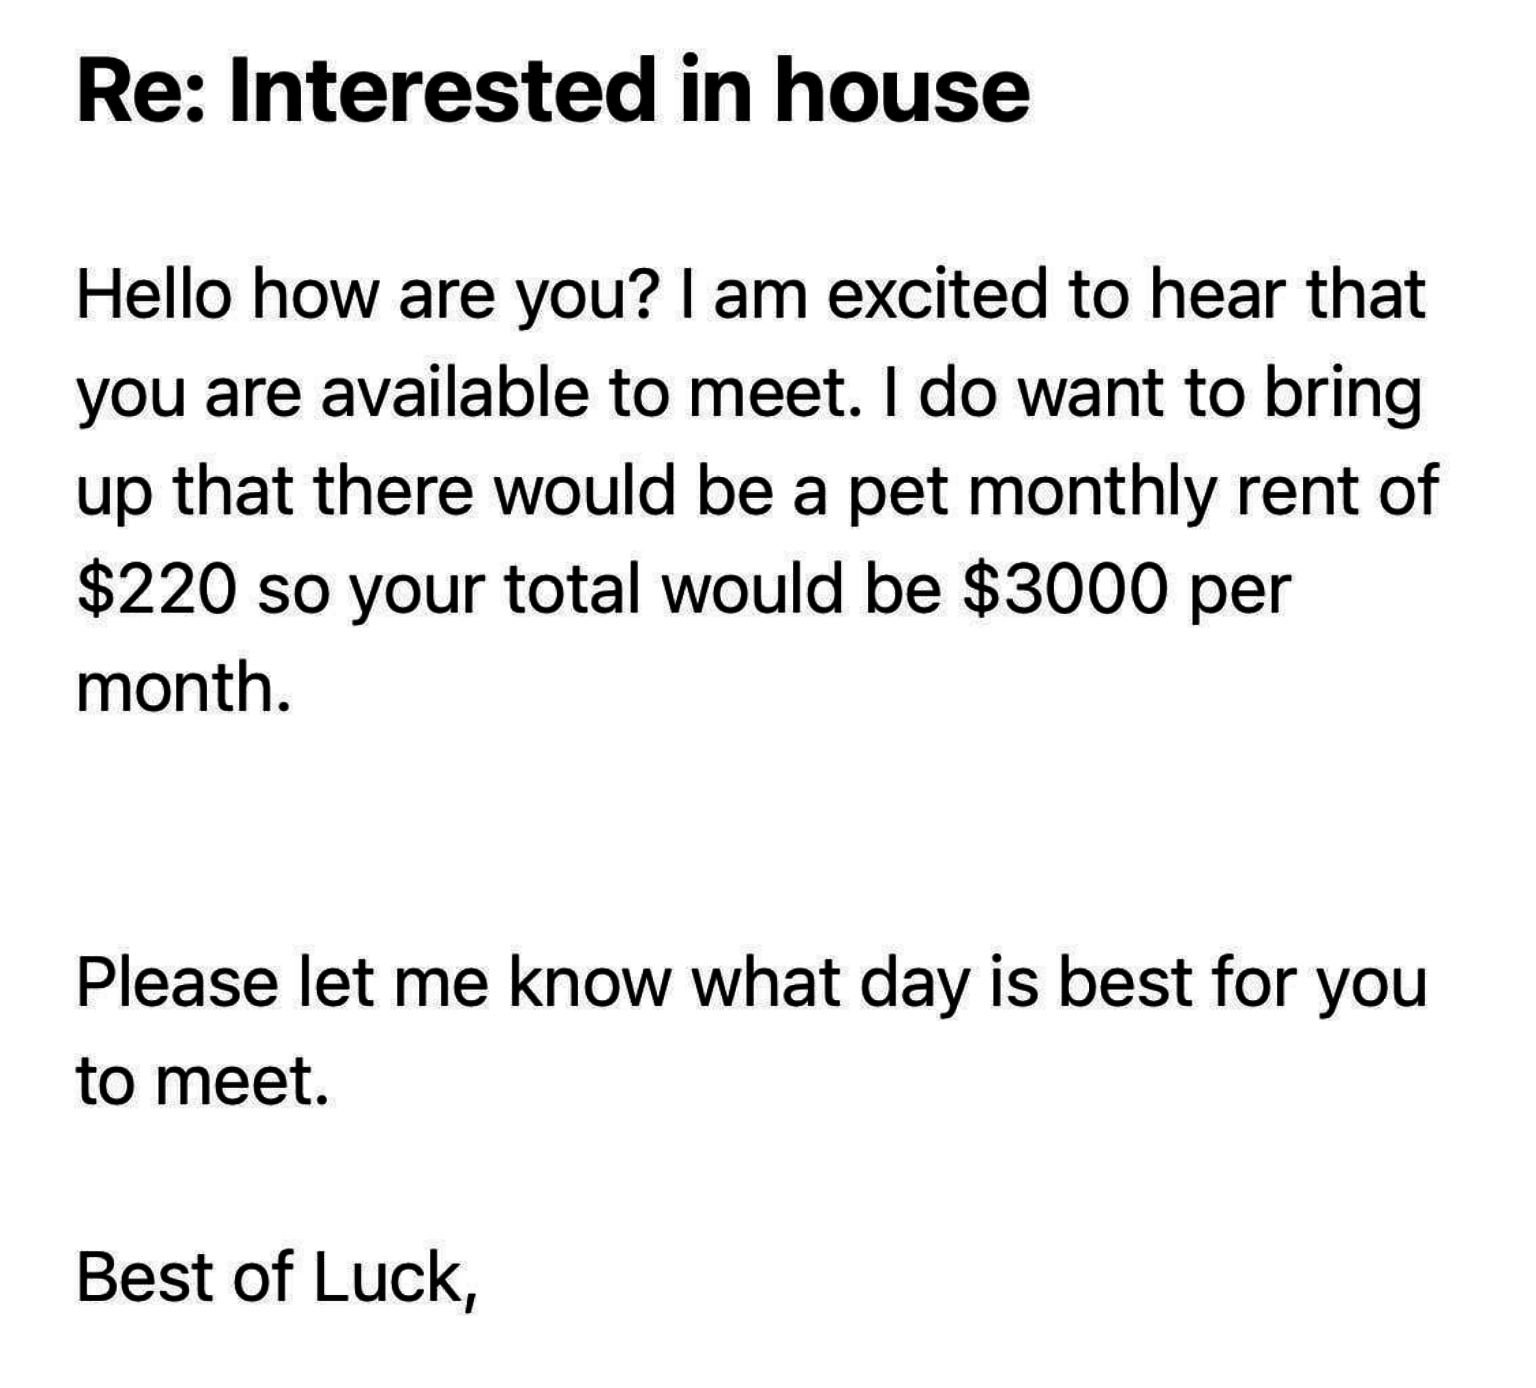 There&#x27;s a pet monthly rent of $220, so the total monthly rent would be $3,000